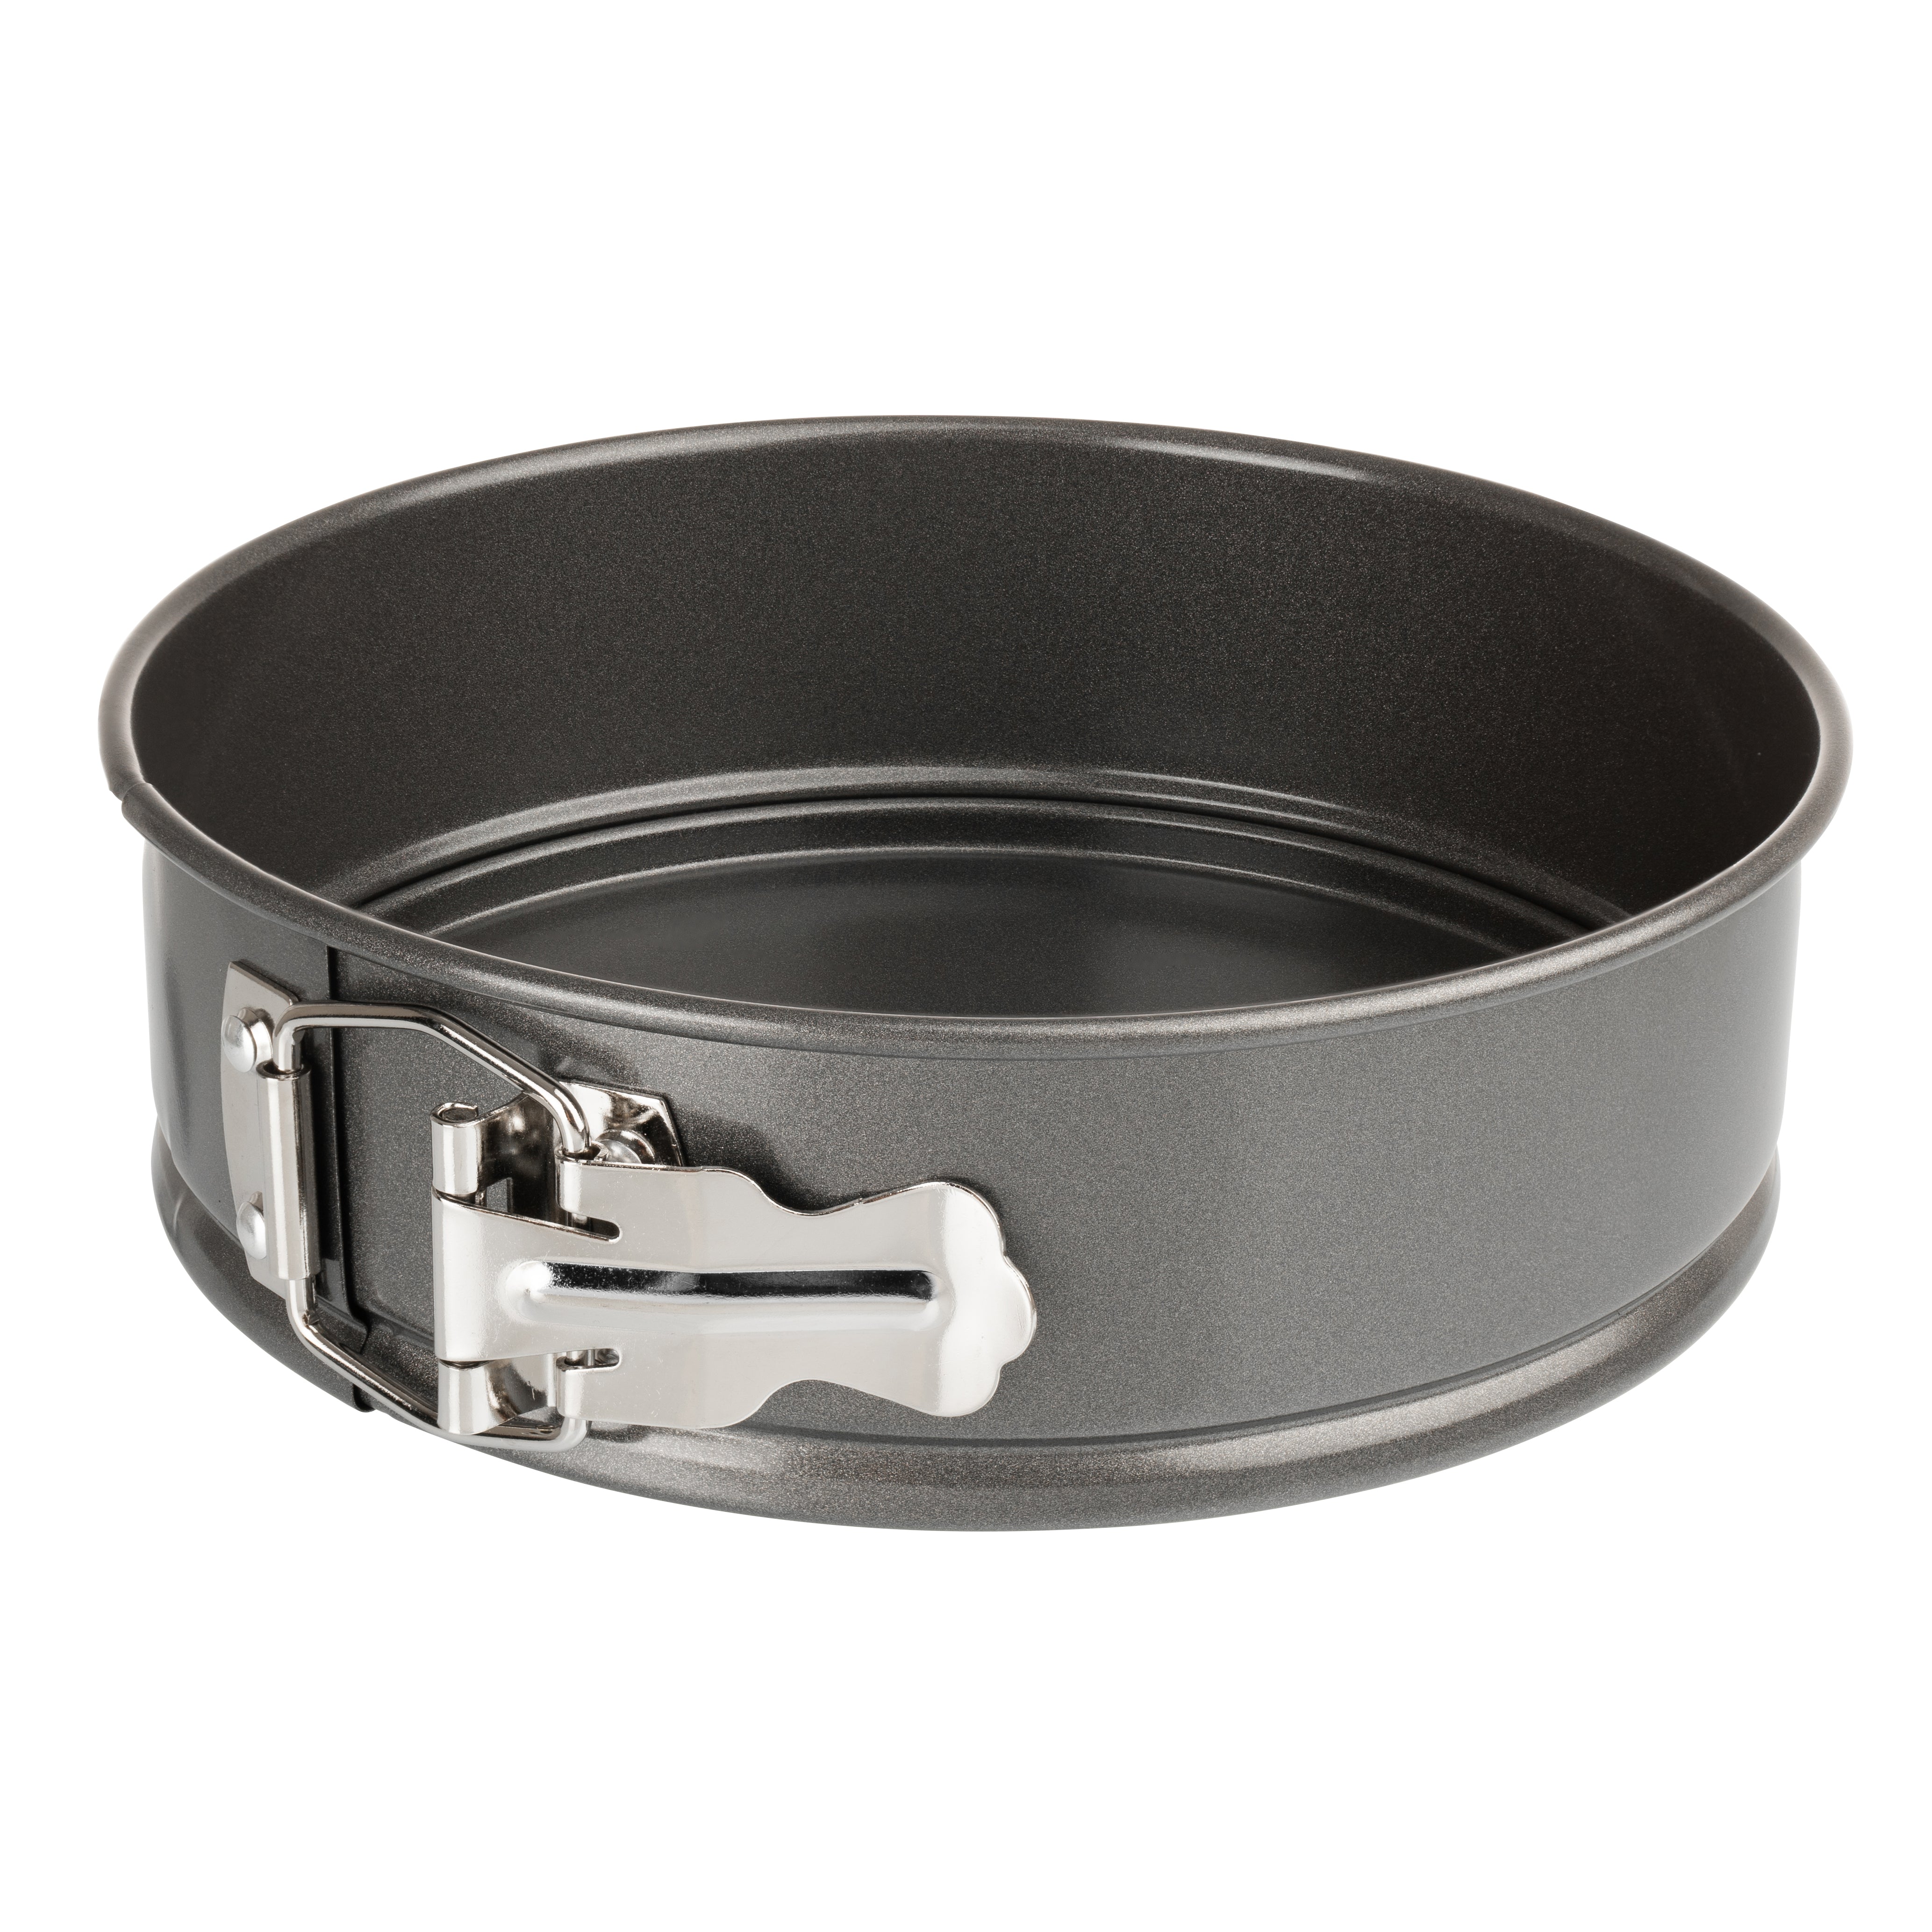 Luxe Kitchen Professional Quality 19.5cm / 8" Cake Baking Springform Pan Tin - The Cooks Cupboard Ltd